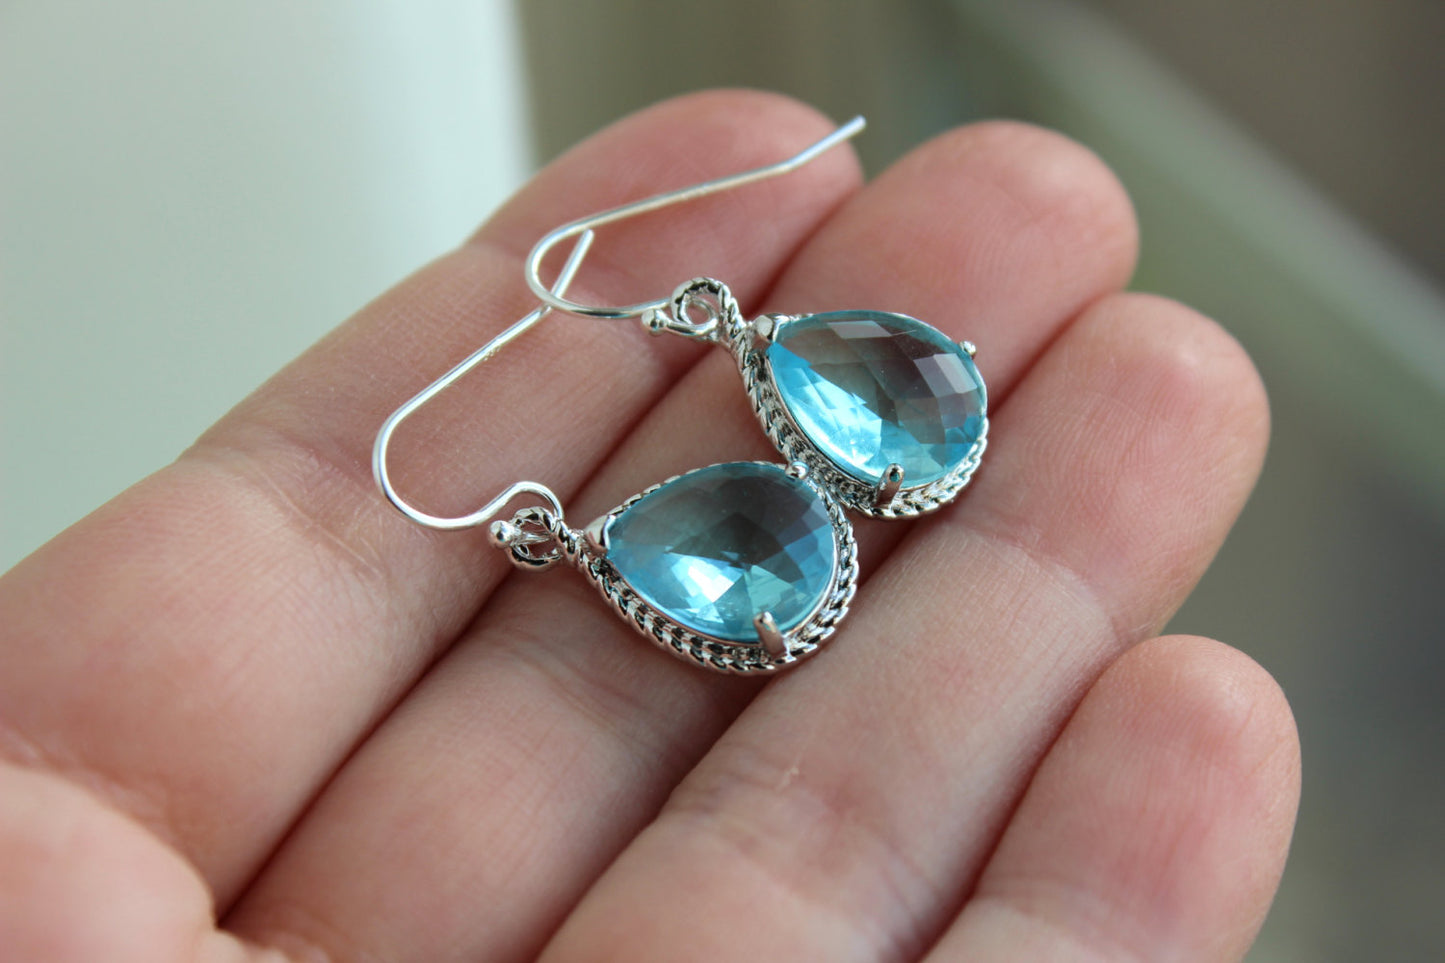 Silver Aquamarine Earrings Wedding Jewelry - Blue Topaz Bridesmaid Earrings Bridesmaid Gift Blue Bridal Jewelry Personalized Thank You Note